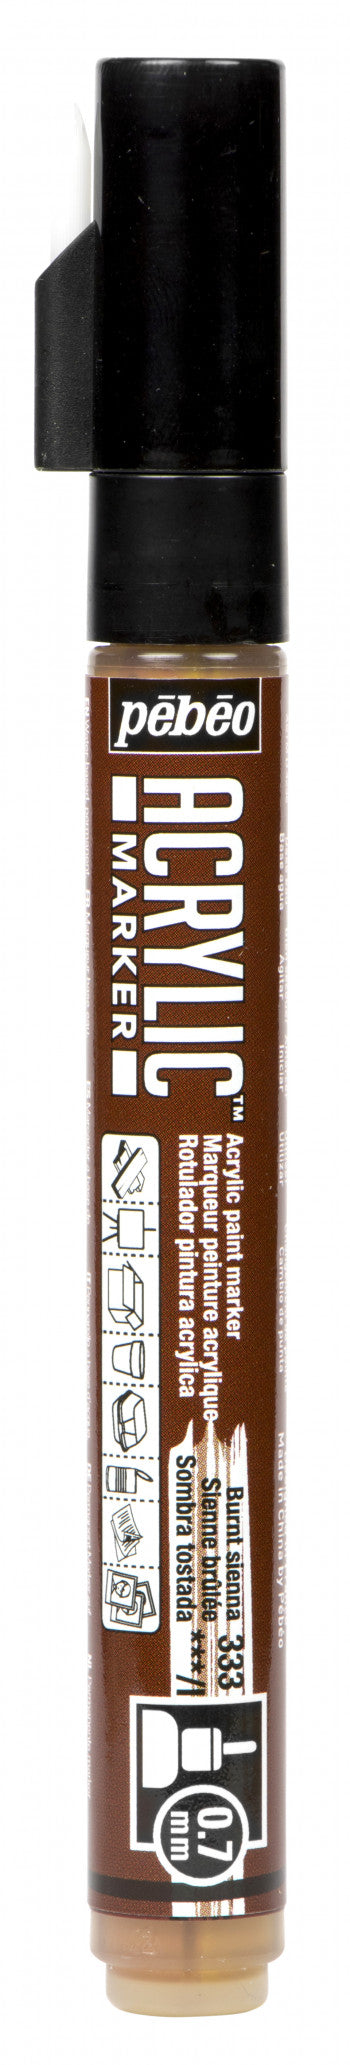 Acrylic Marker 0.7mm Pebeo   Sienne brulée